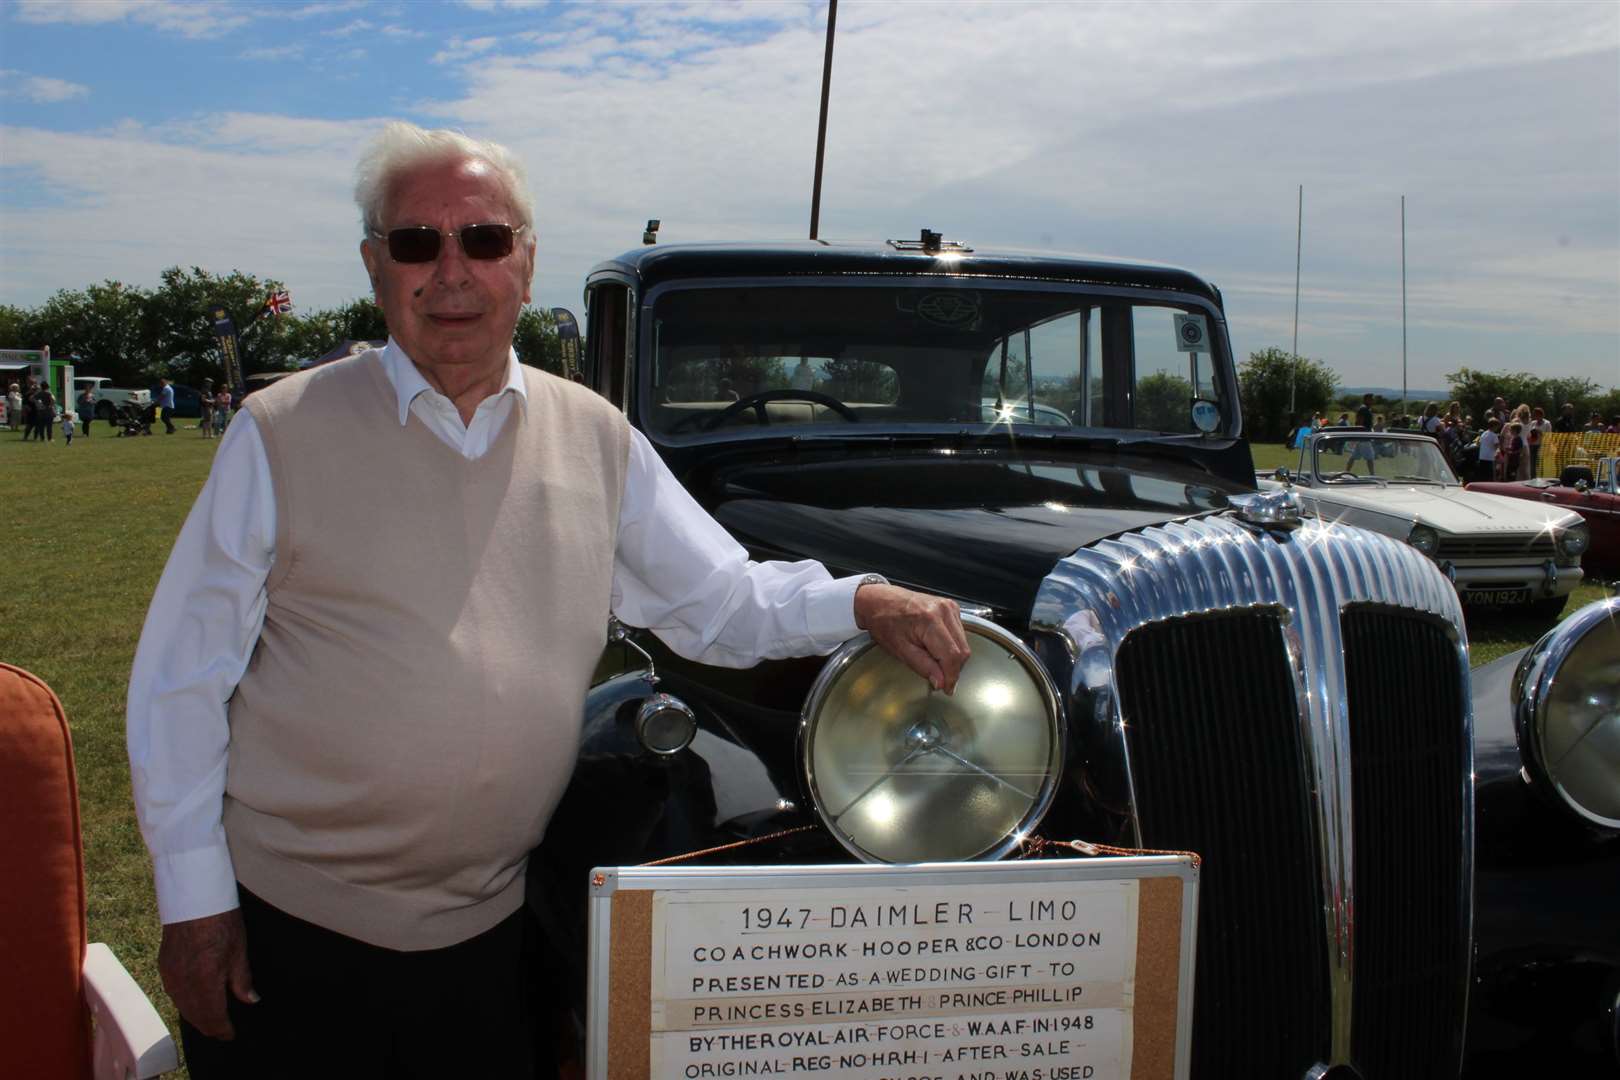 Retired Sheppey businessman Tom Lambkin and his 1947 Daimler limousine which was presented to Princess Elizabeth and Prince Philip by the RAF as a wedding present. The vehicle was on show at the Sheppey Spectacular